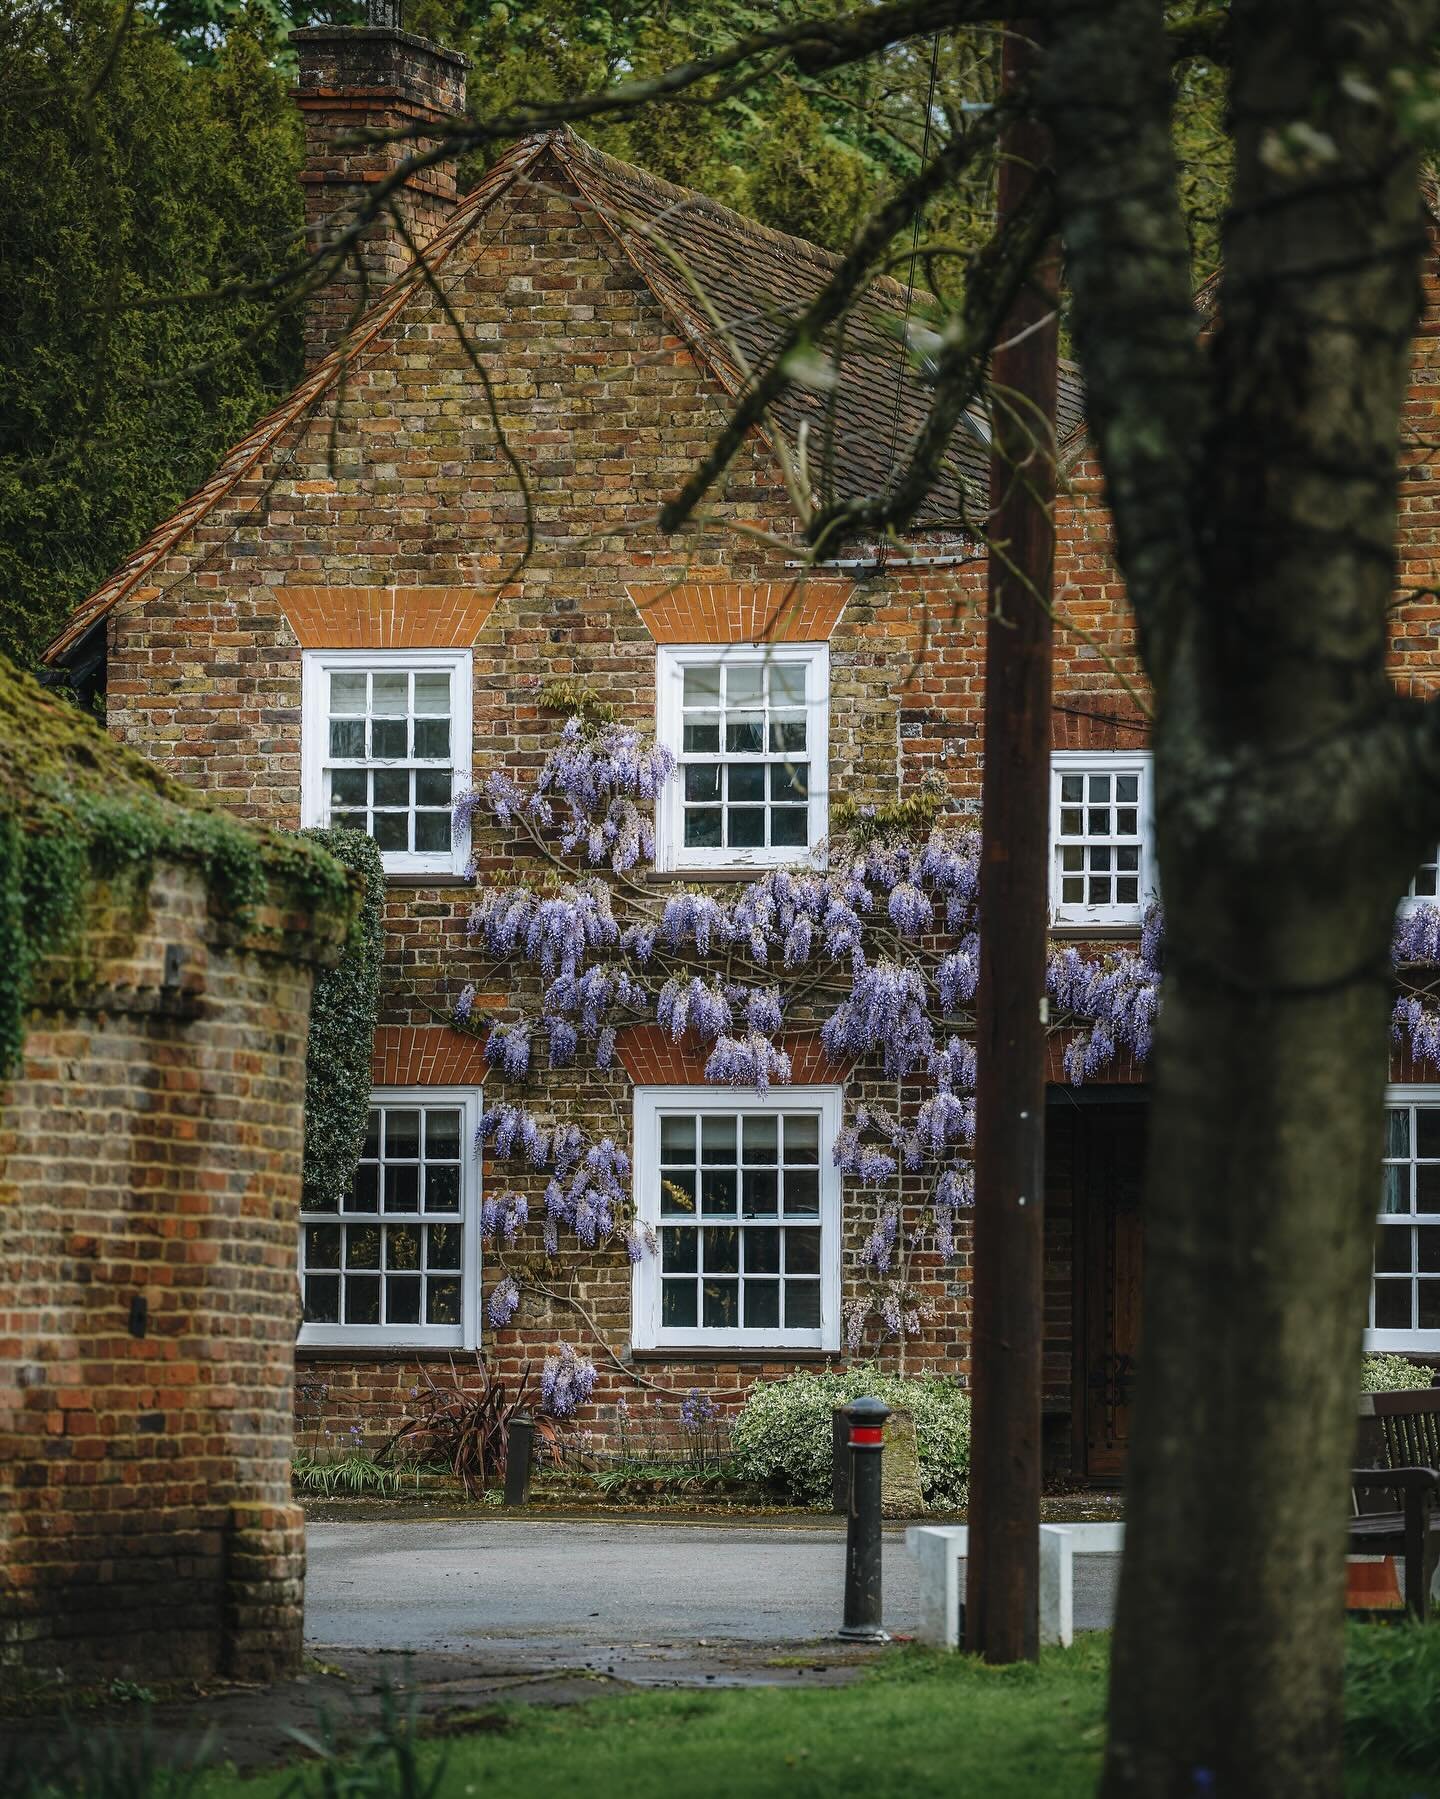 The picturesque village of Denham, Buckinghamshire. 😍💜🏡
Love the crooked covered wisteria cottages and little stream that runs through the village. 🌳
&bull;
&bull;
#village #villagelife #villages #buckinghamshire #england #englandphotography #eng